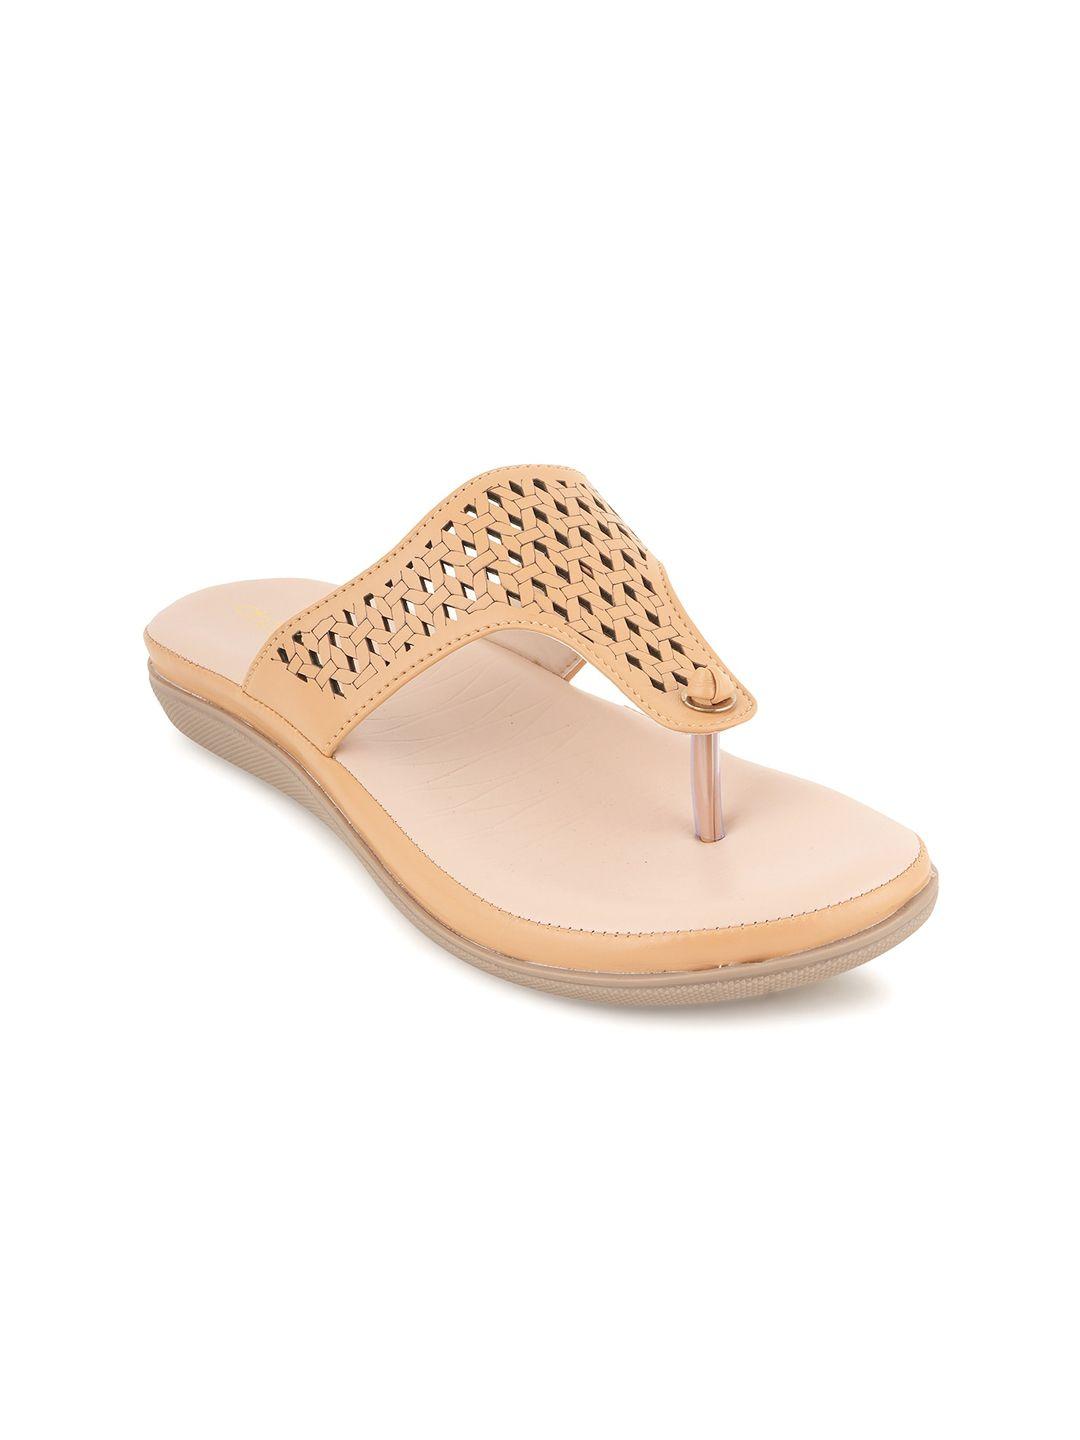 dressberry women tan brown textured t-strap flats with laser cuts